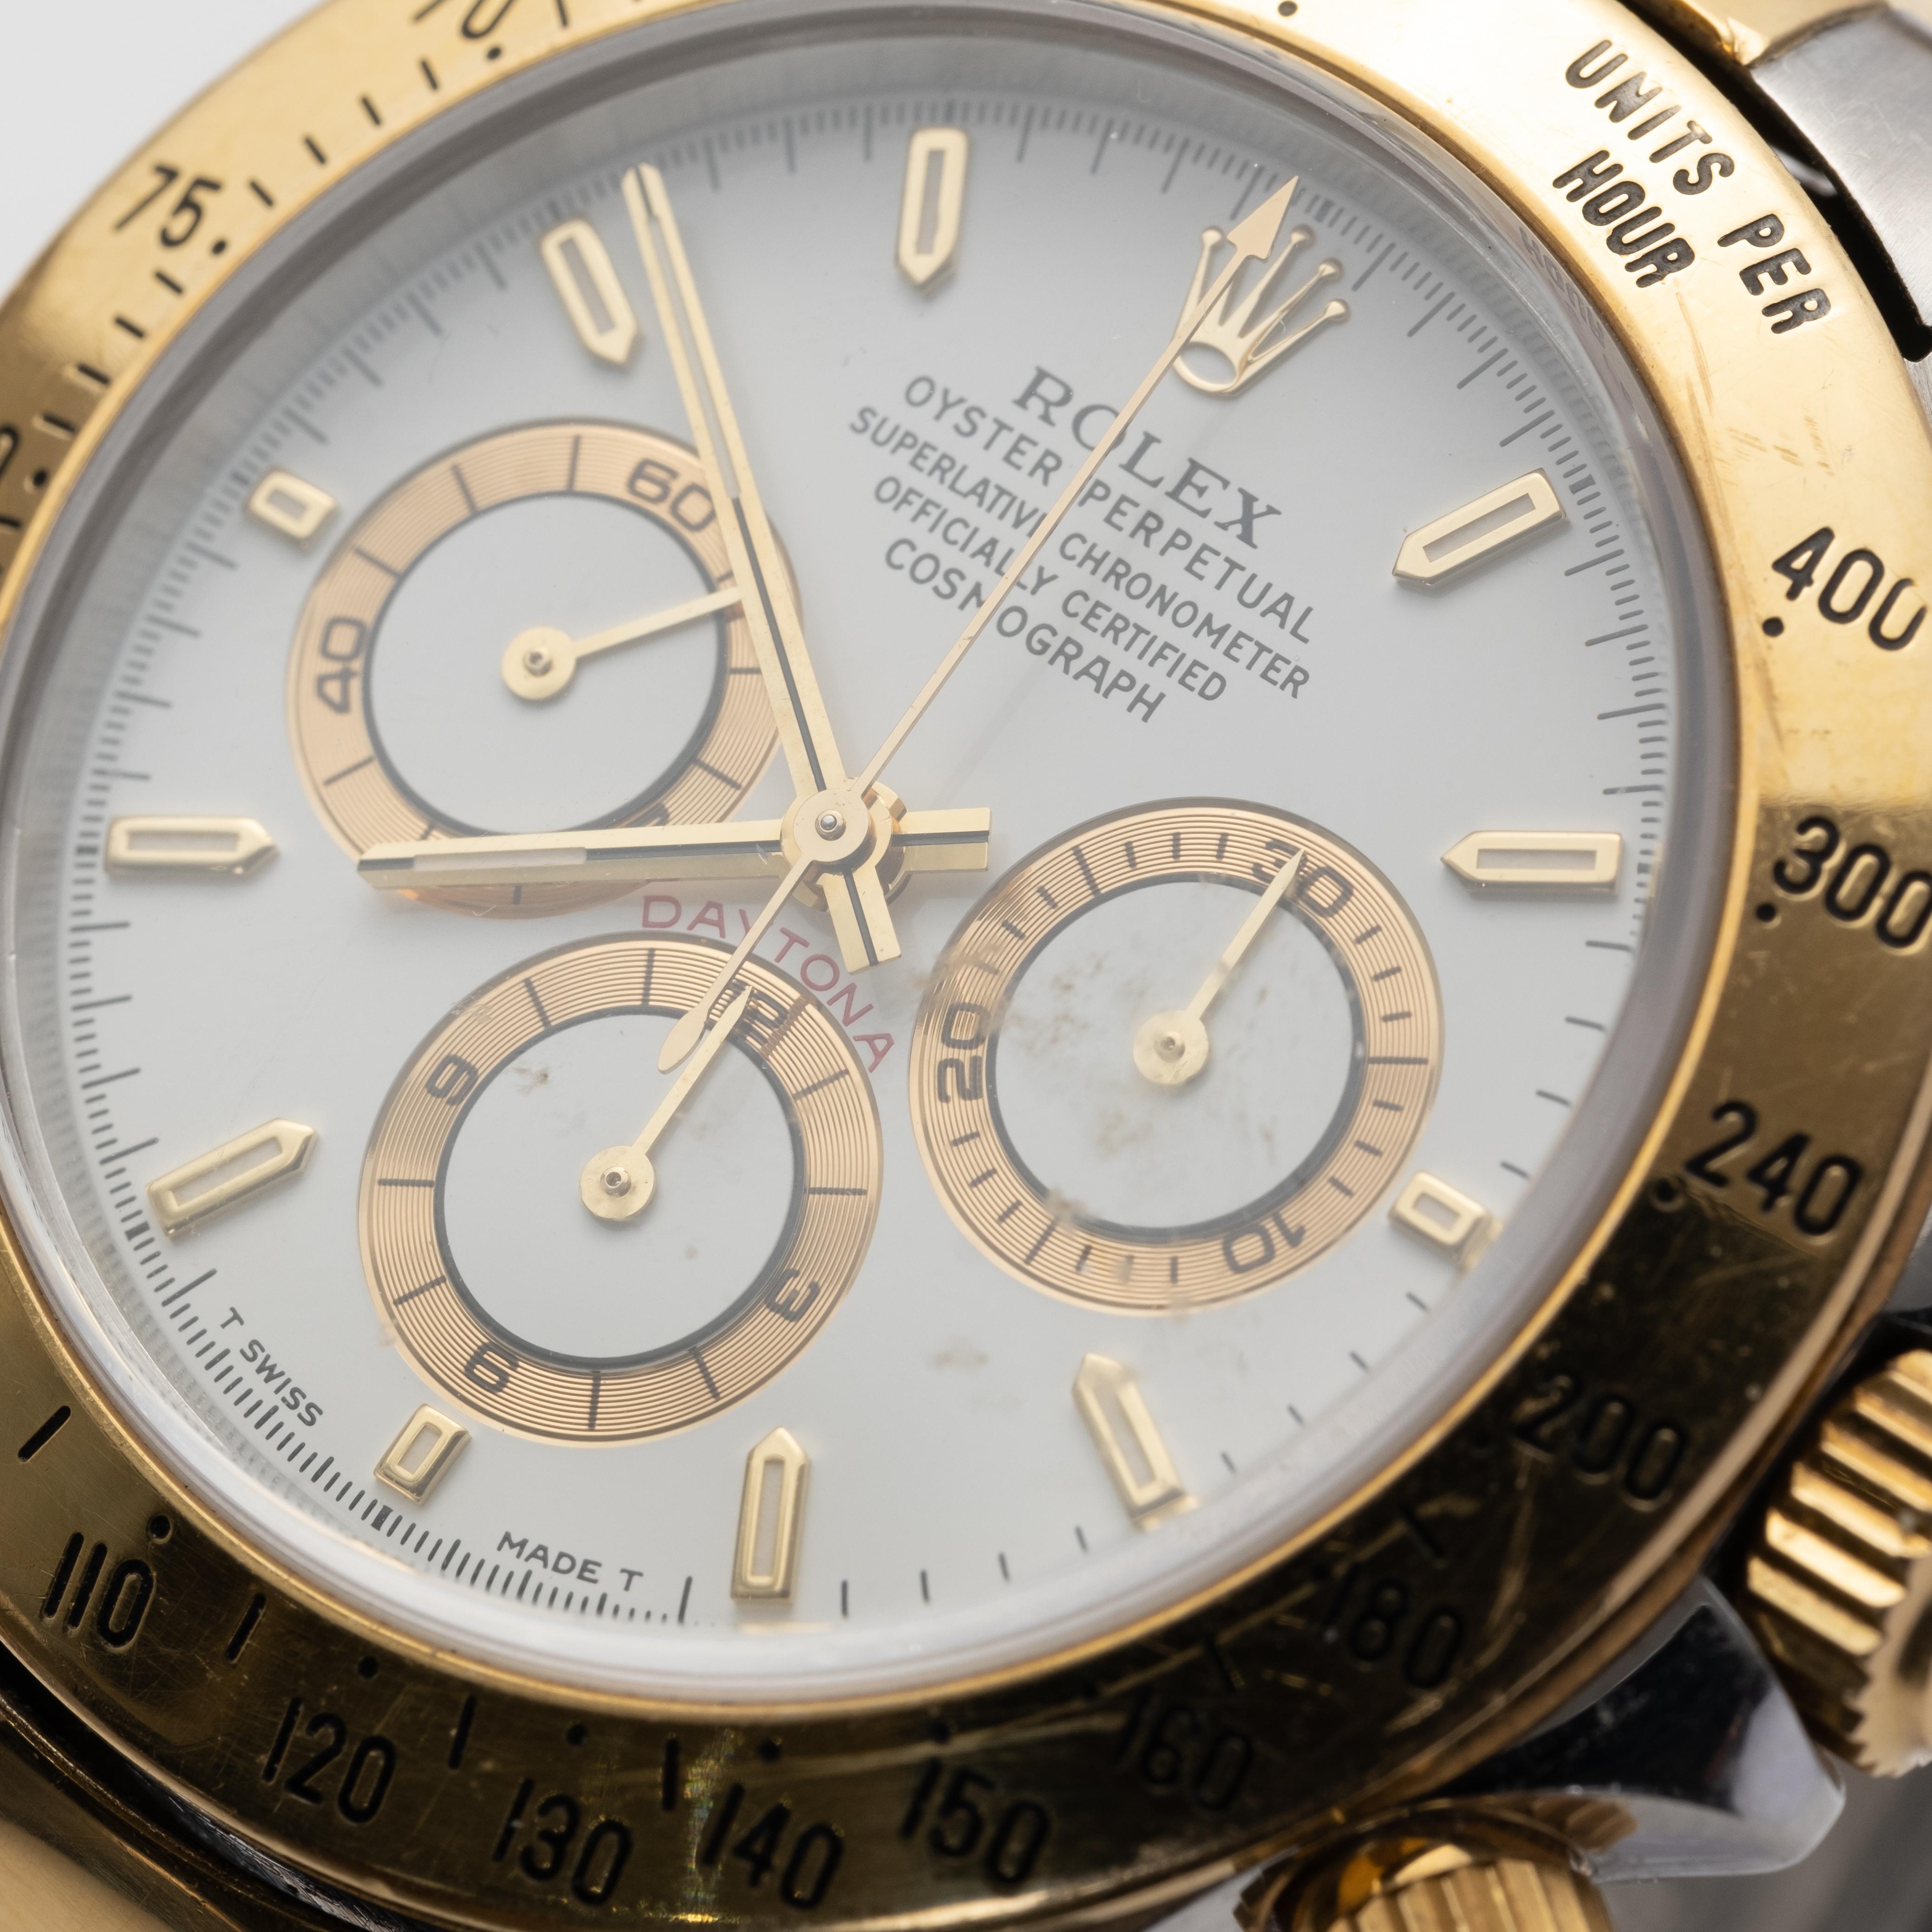 Rolex Two-tone Chronograph Daytona Reference 16523 Wristwatch with Box and Papers, c. 1997, white dial with three subsidiary dials, engraved gold tachometer bezel, screw-down crown and pushers, 31-jewel caliber 4030 automatic movement, case back